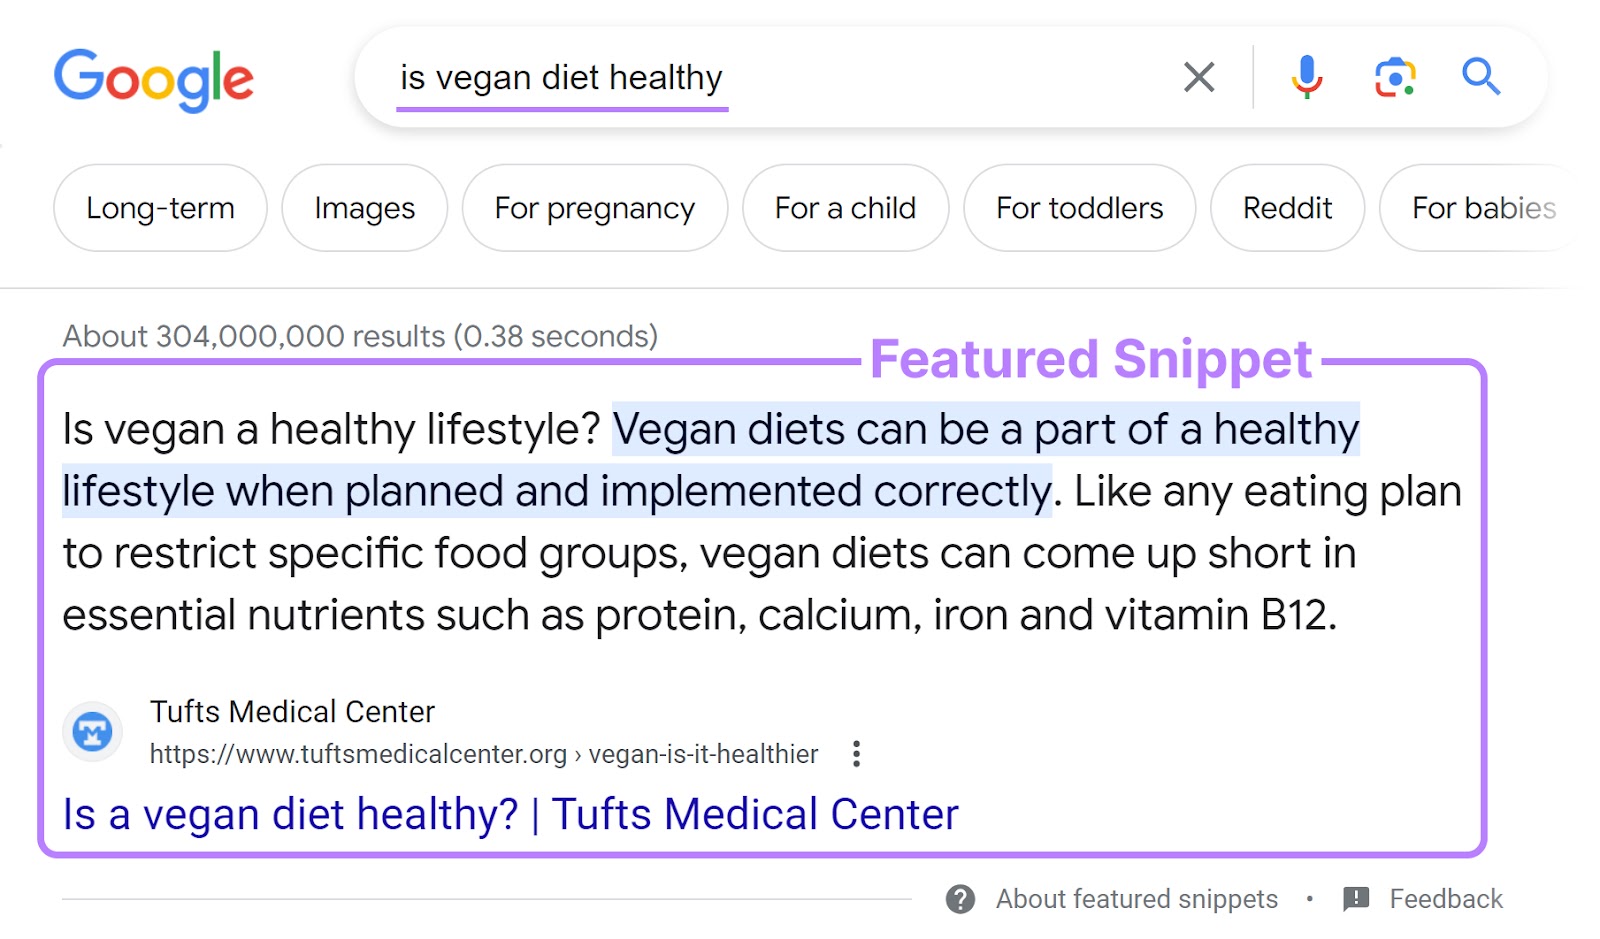 Featured snippet on Google SERP for “is vegan diet healthy" search